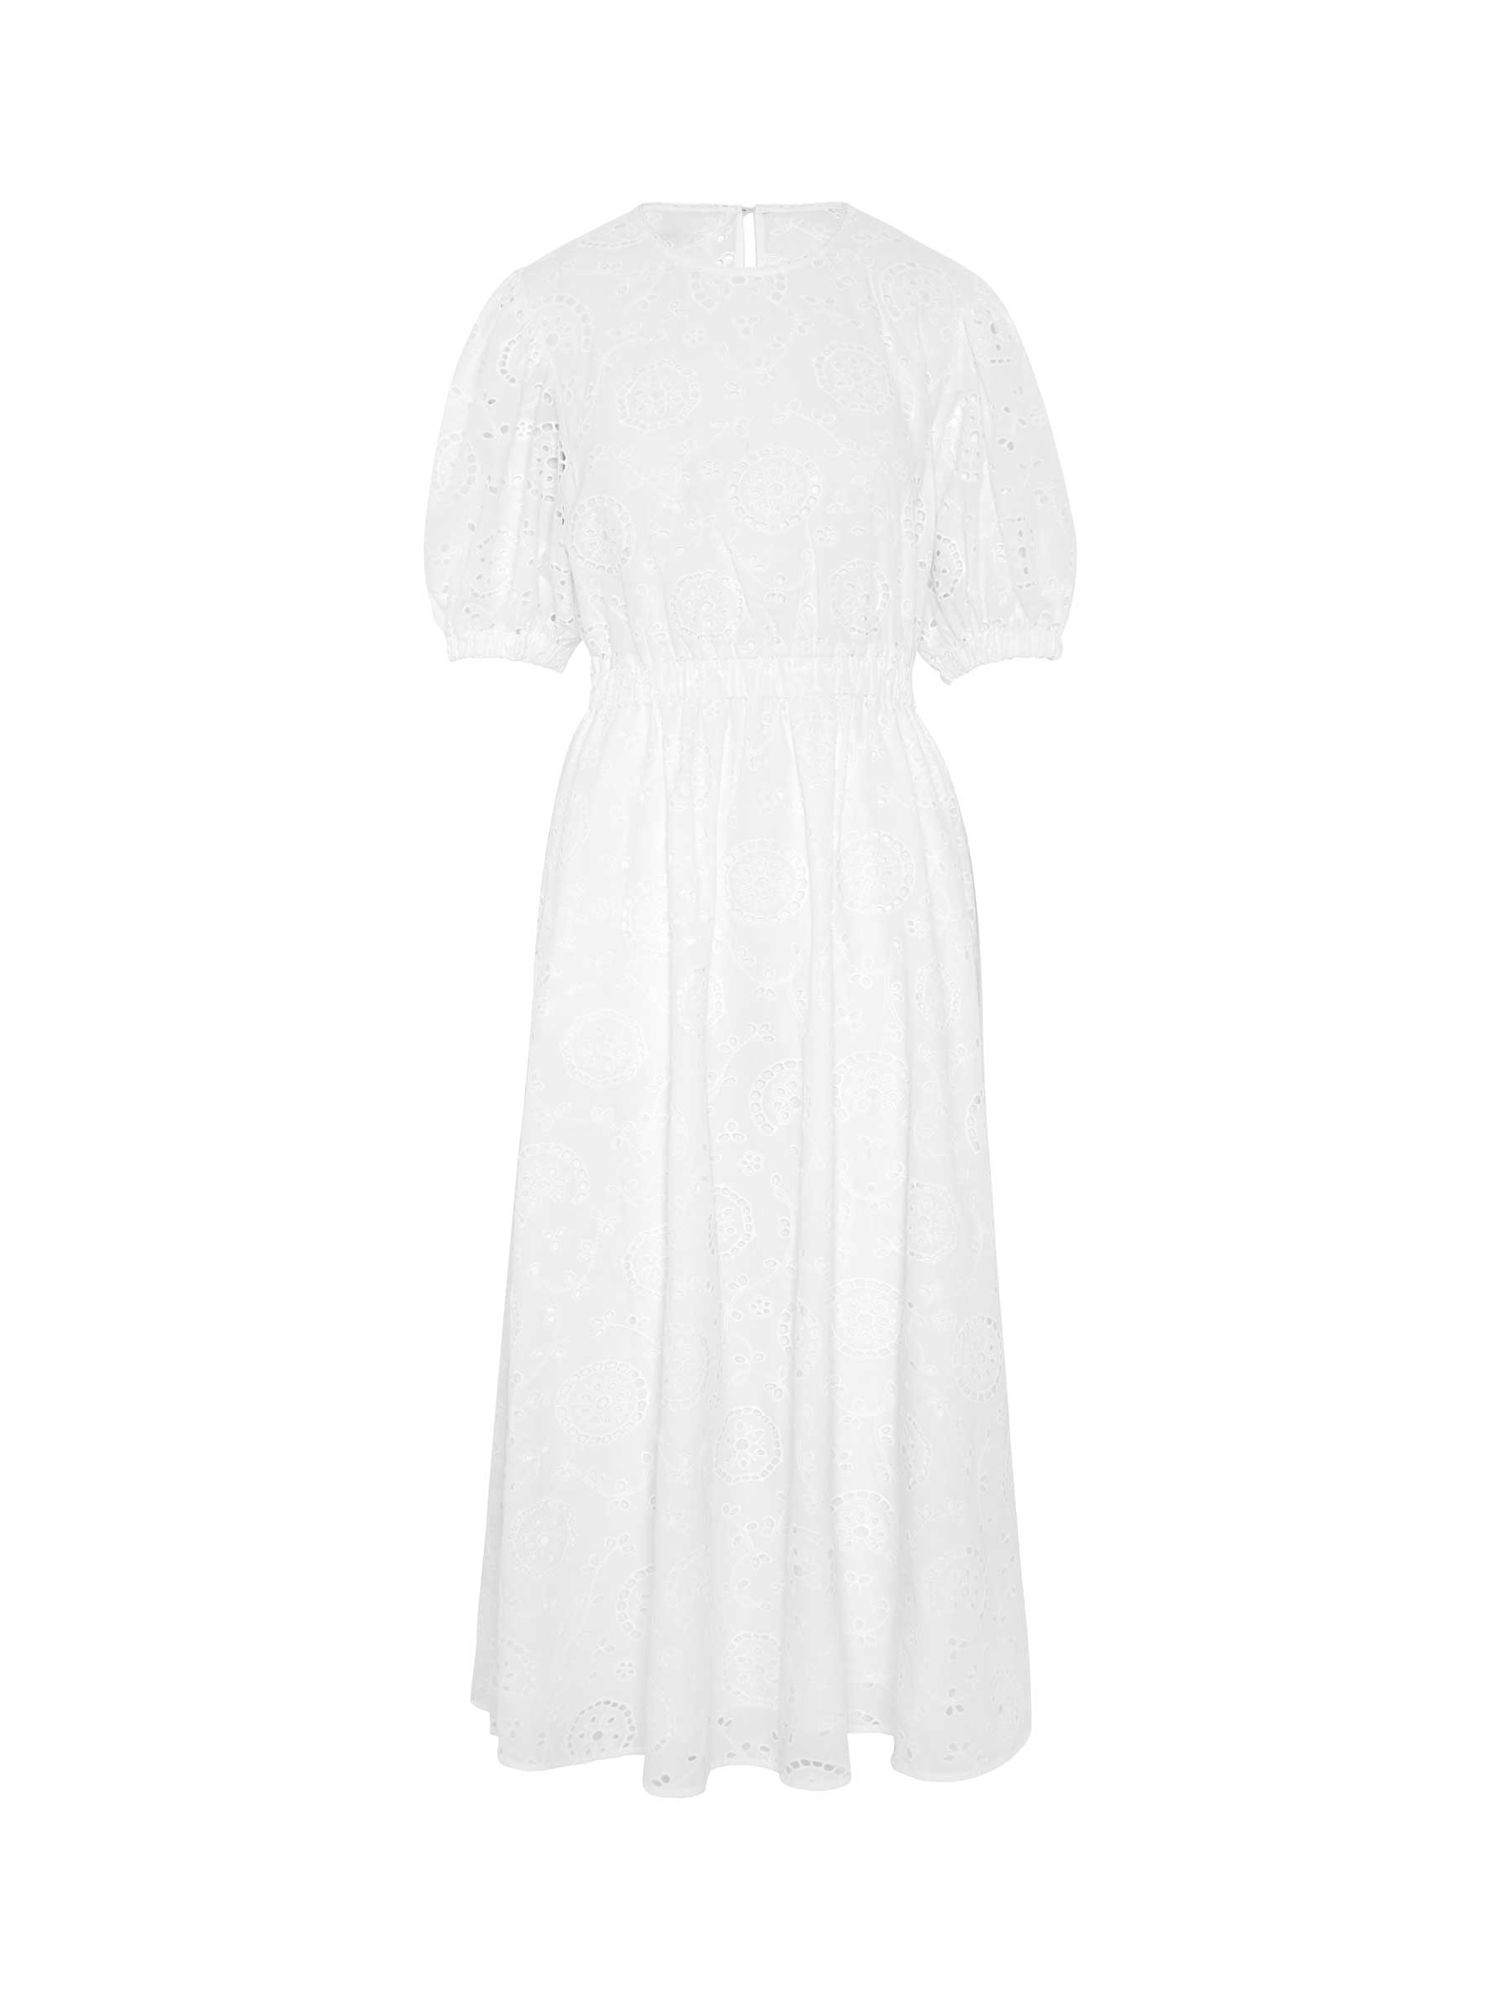 Vivere By Savannah Miller Stella Broderie Anglaise Maxi Dress, White at ...